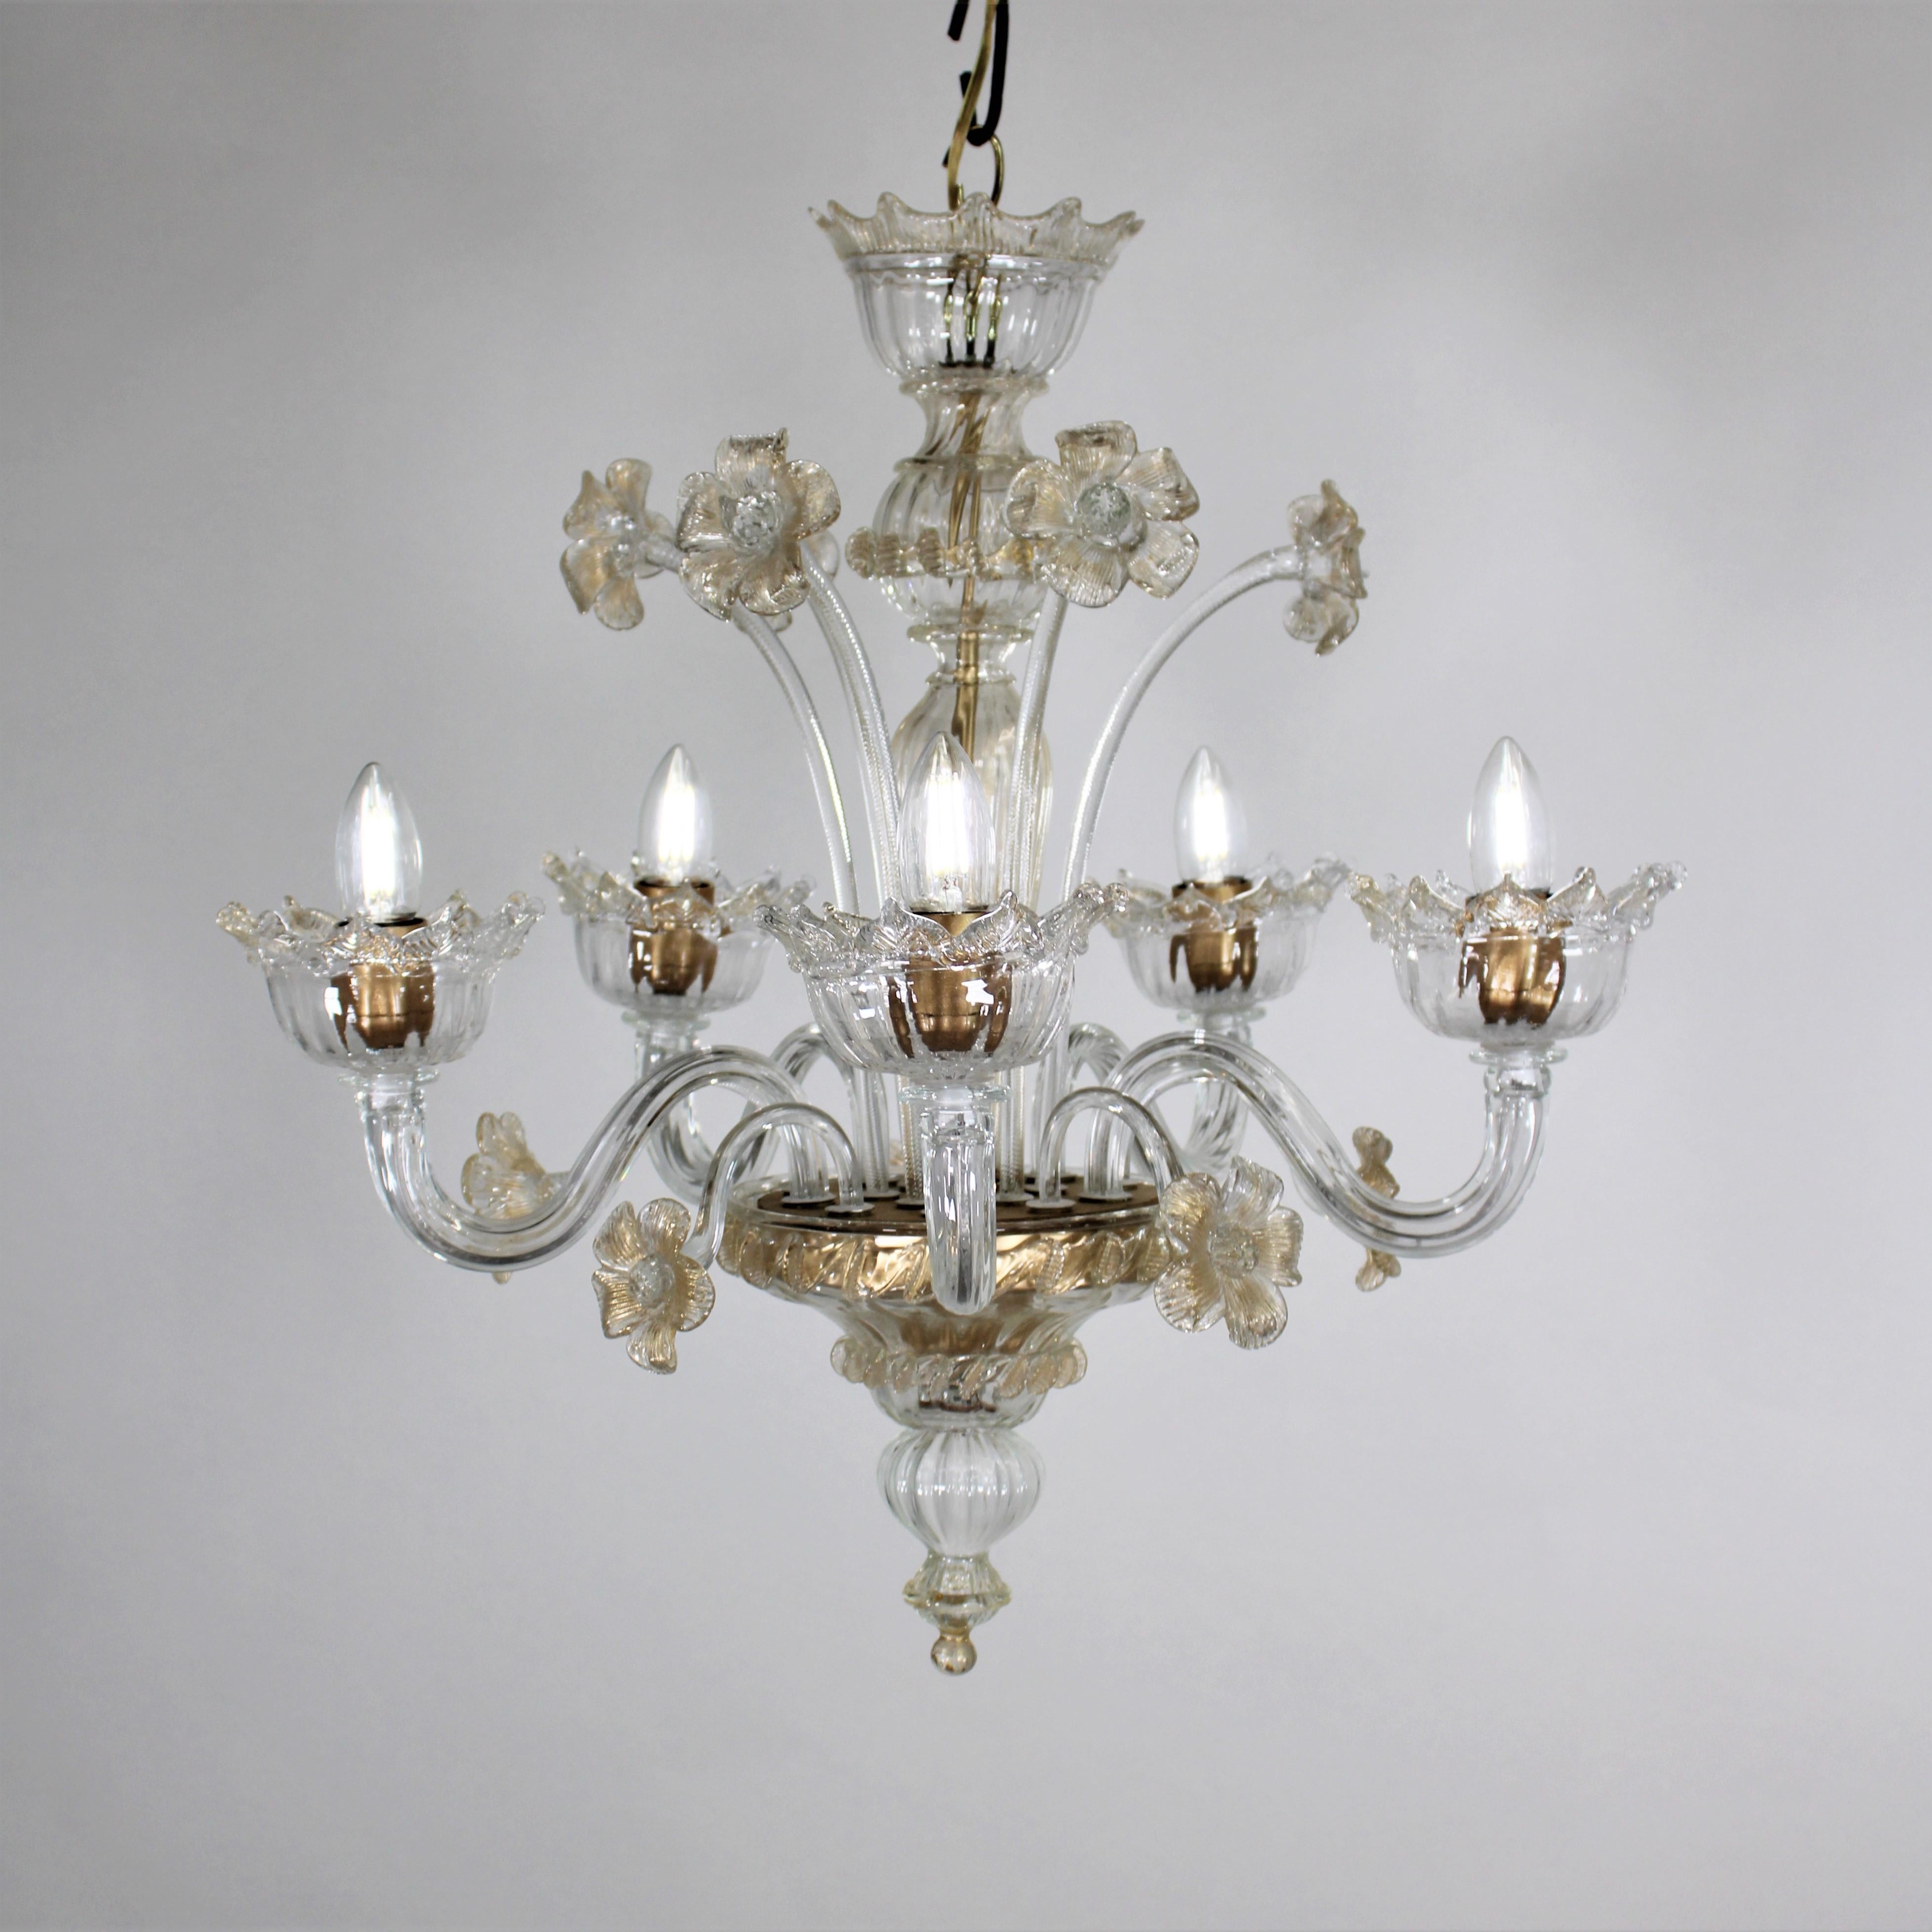 Italian Vintage Baroque Style Five Arm Gold Infused Cristallo Murano Glass Chandelier For Sale